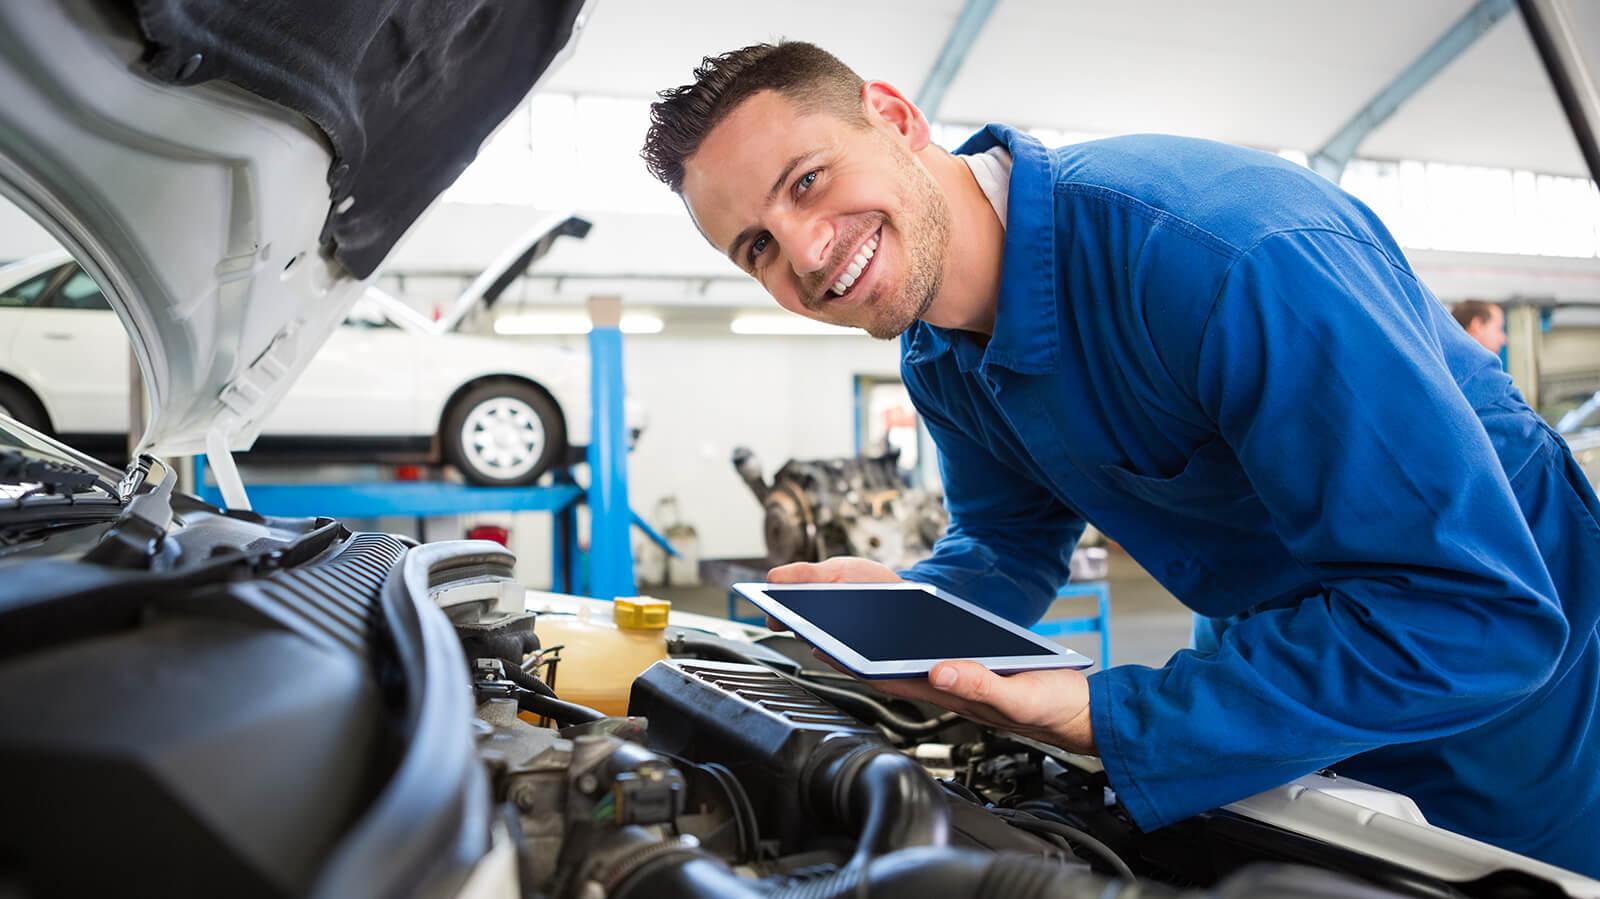 Smiling service mechanic inspecting a car's engine